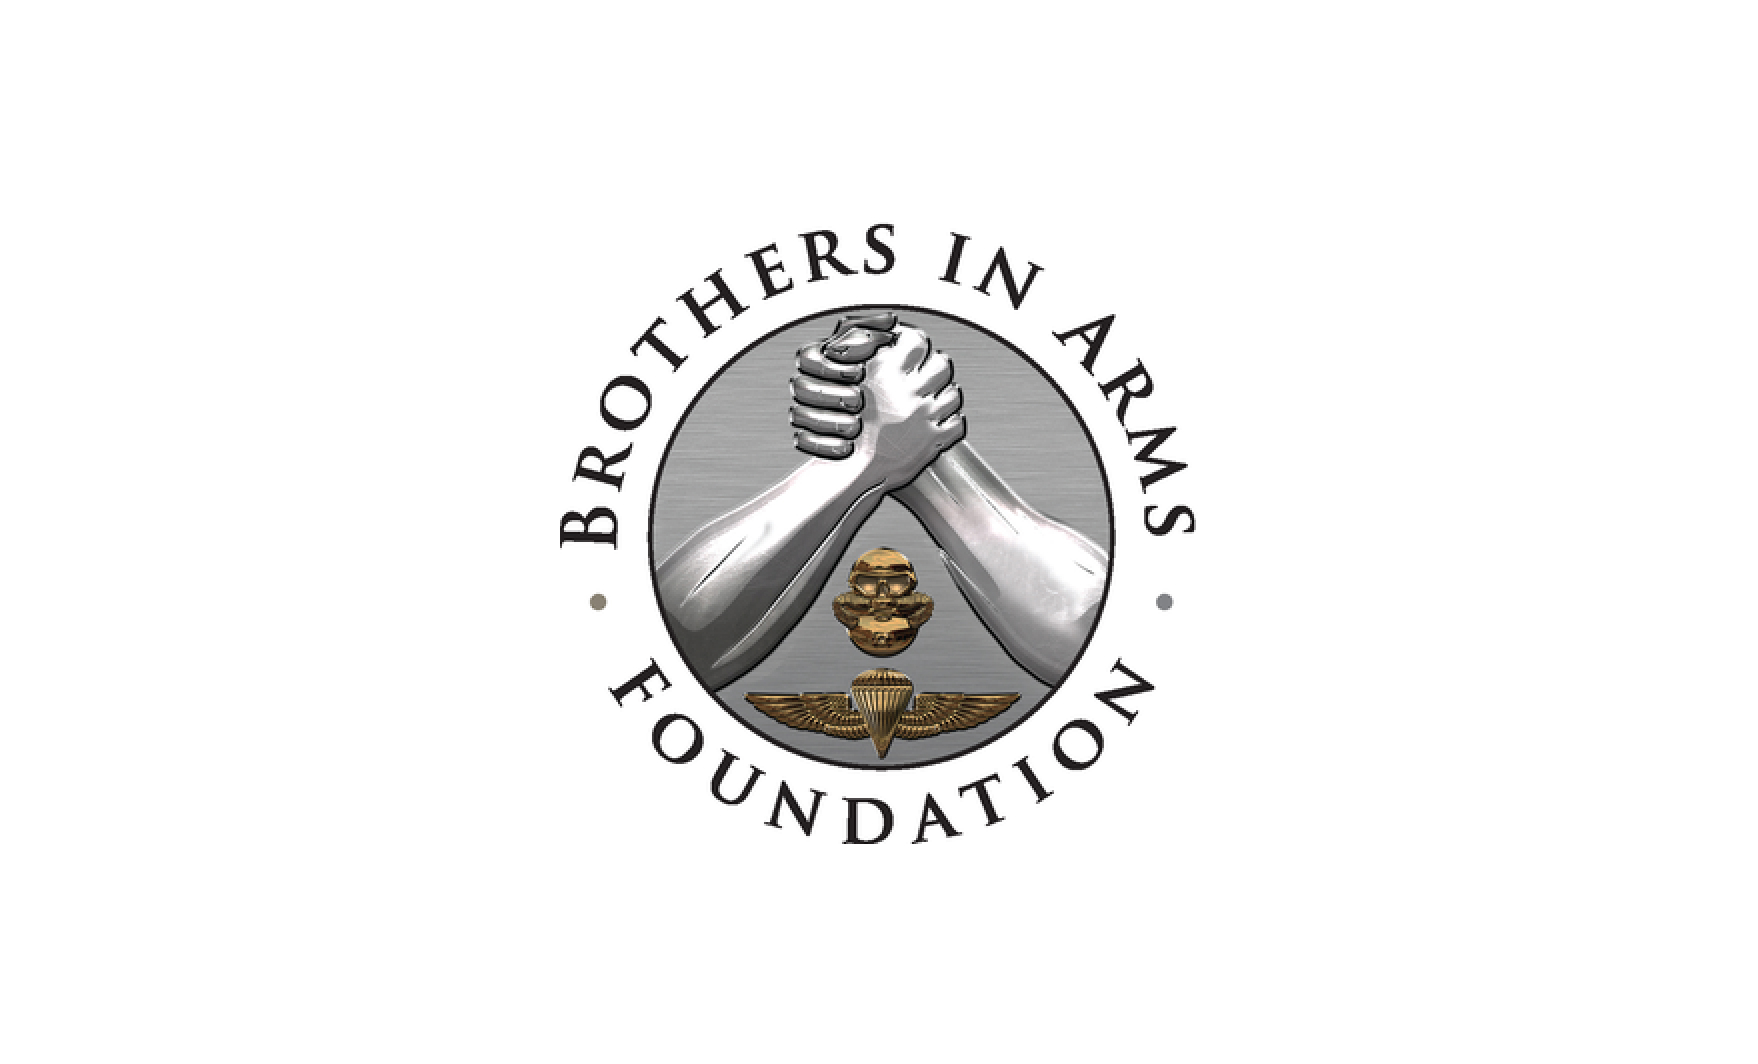 Brothers in Arms Foundation